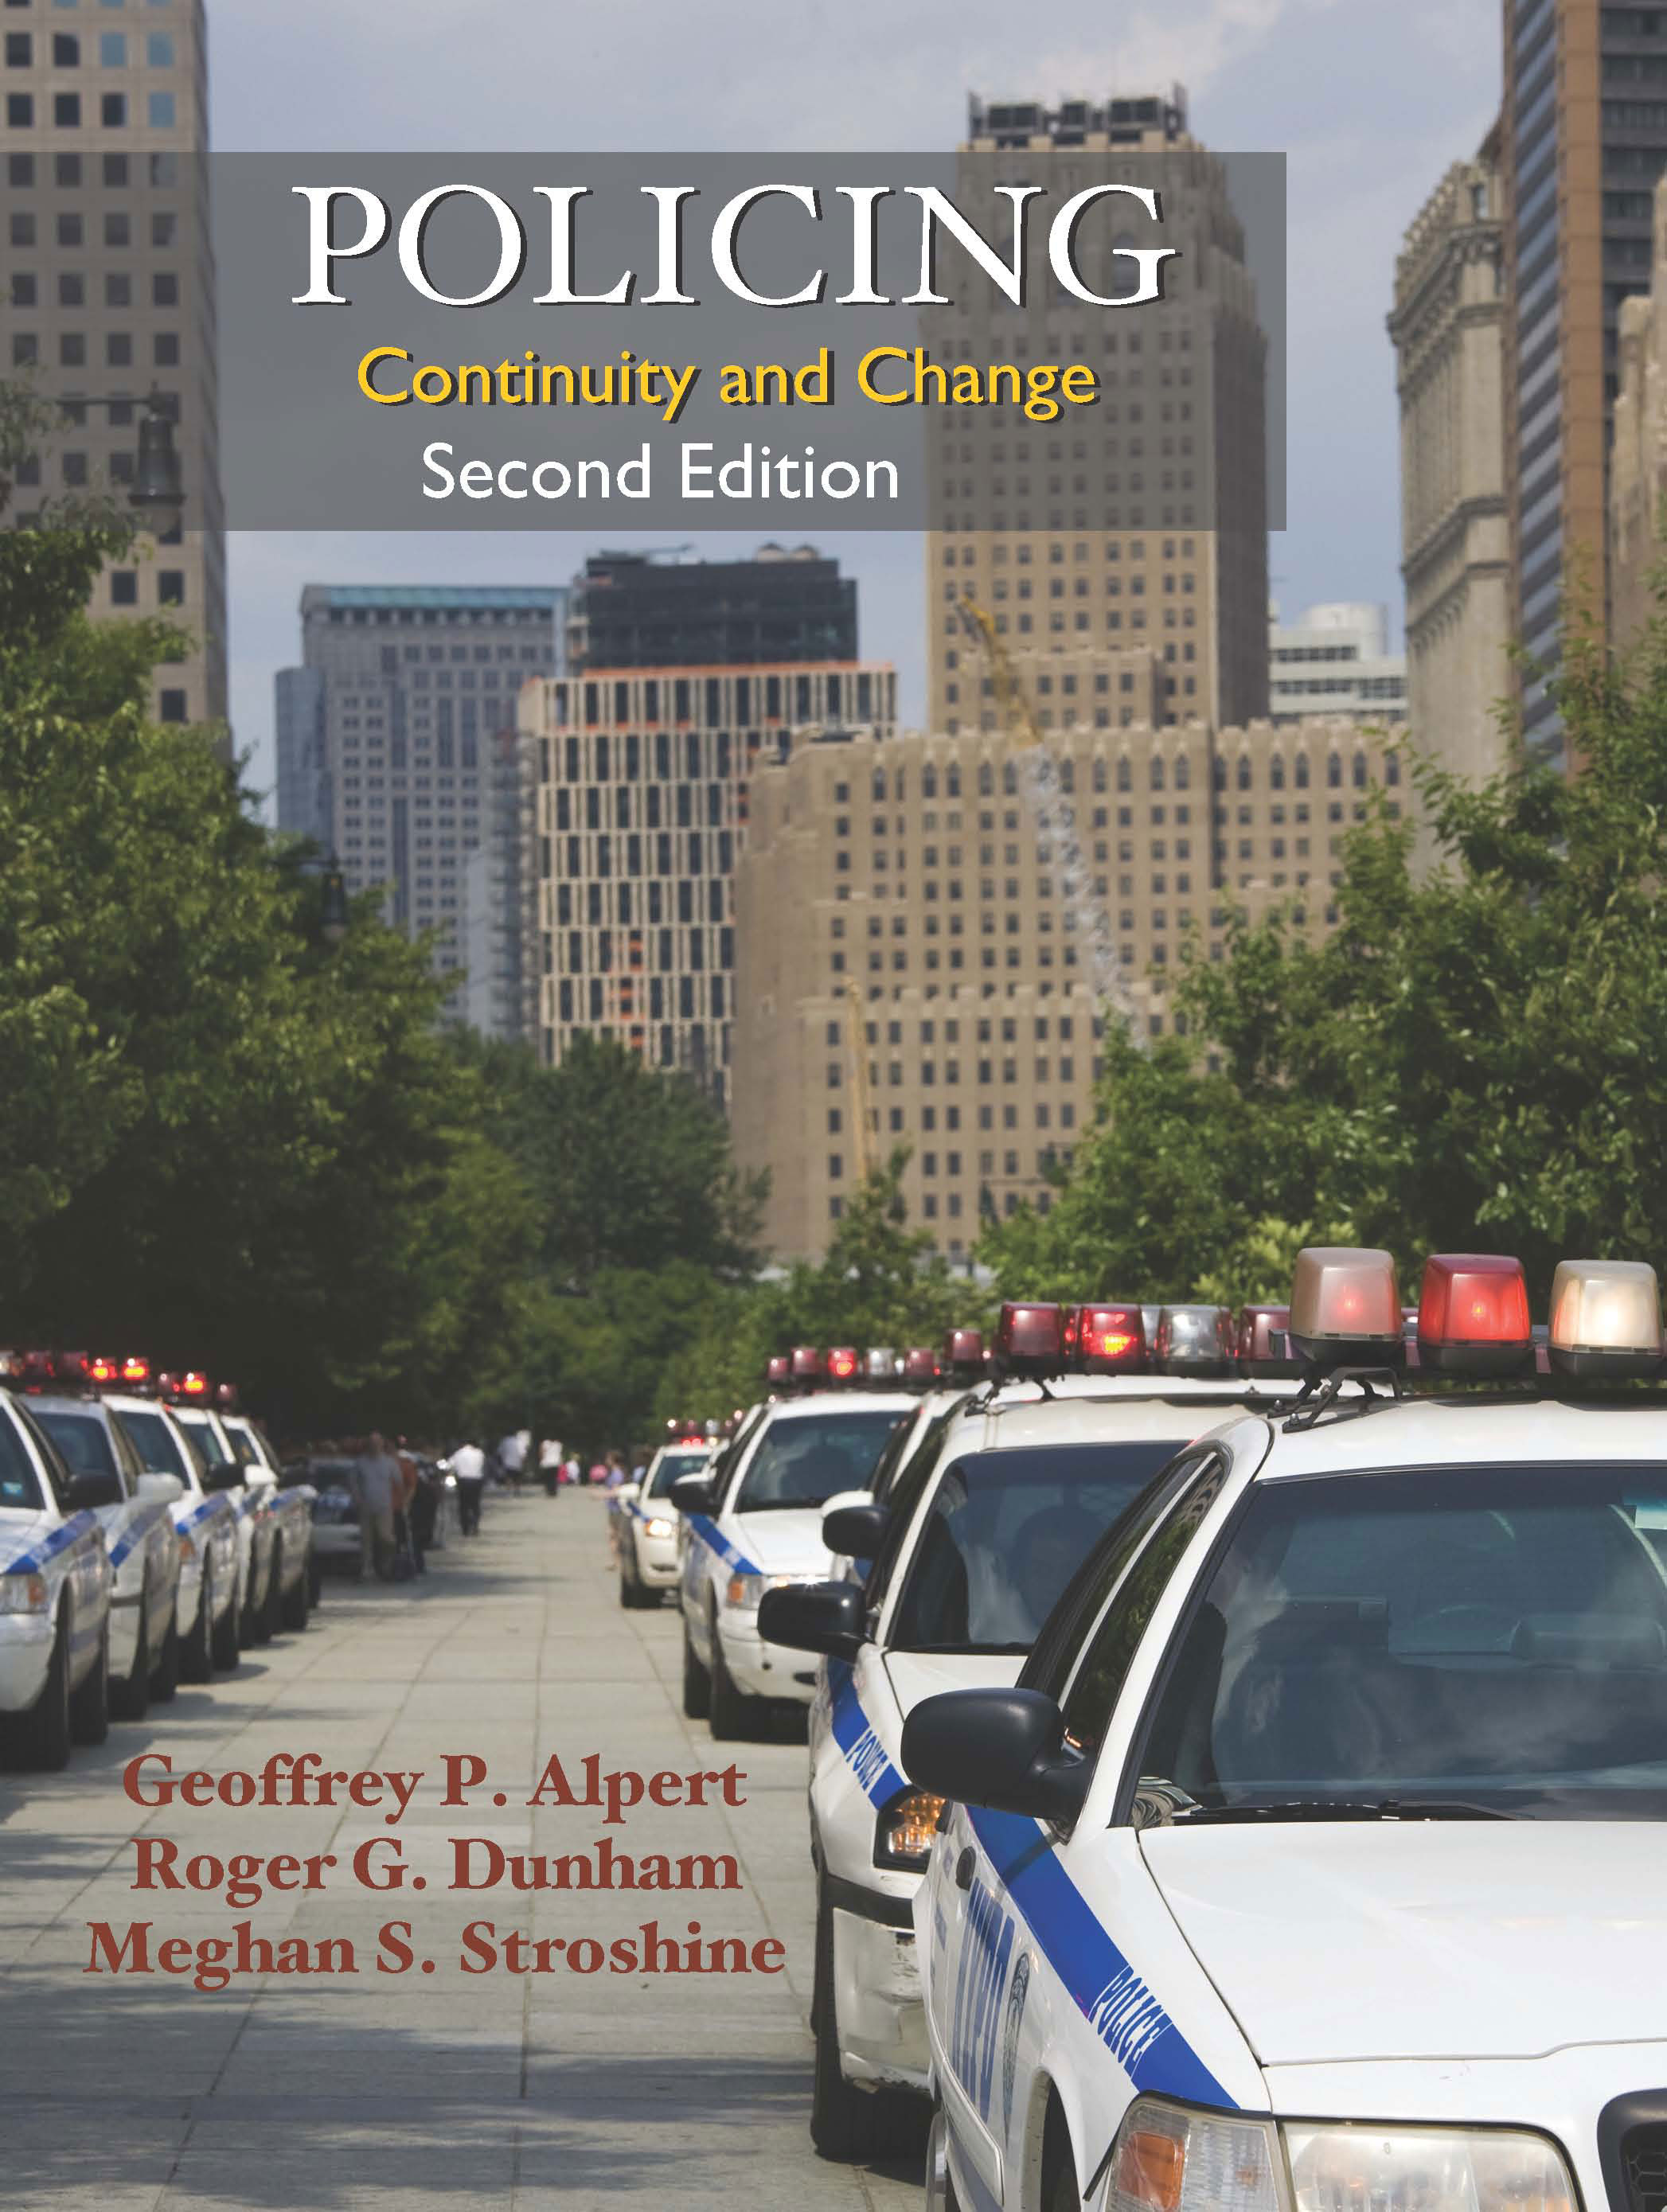 Policing: Continuity and Change by Geoffrey P. Alpert, Roger G. Dunham, Meghan S. Stroshine